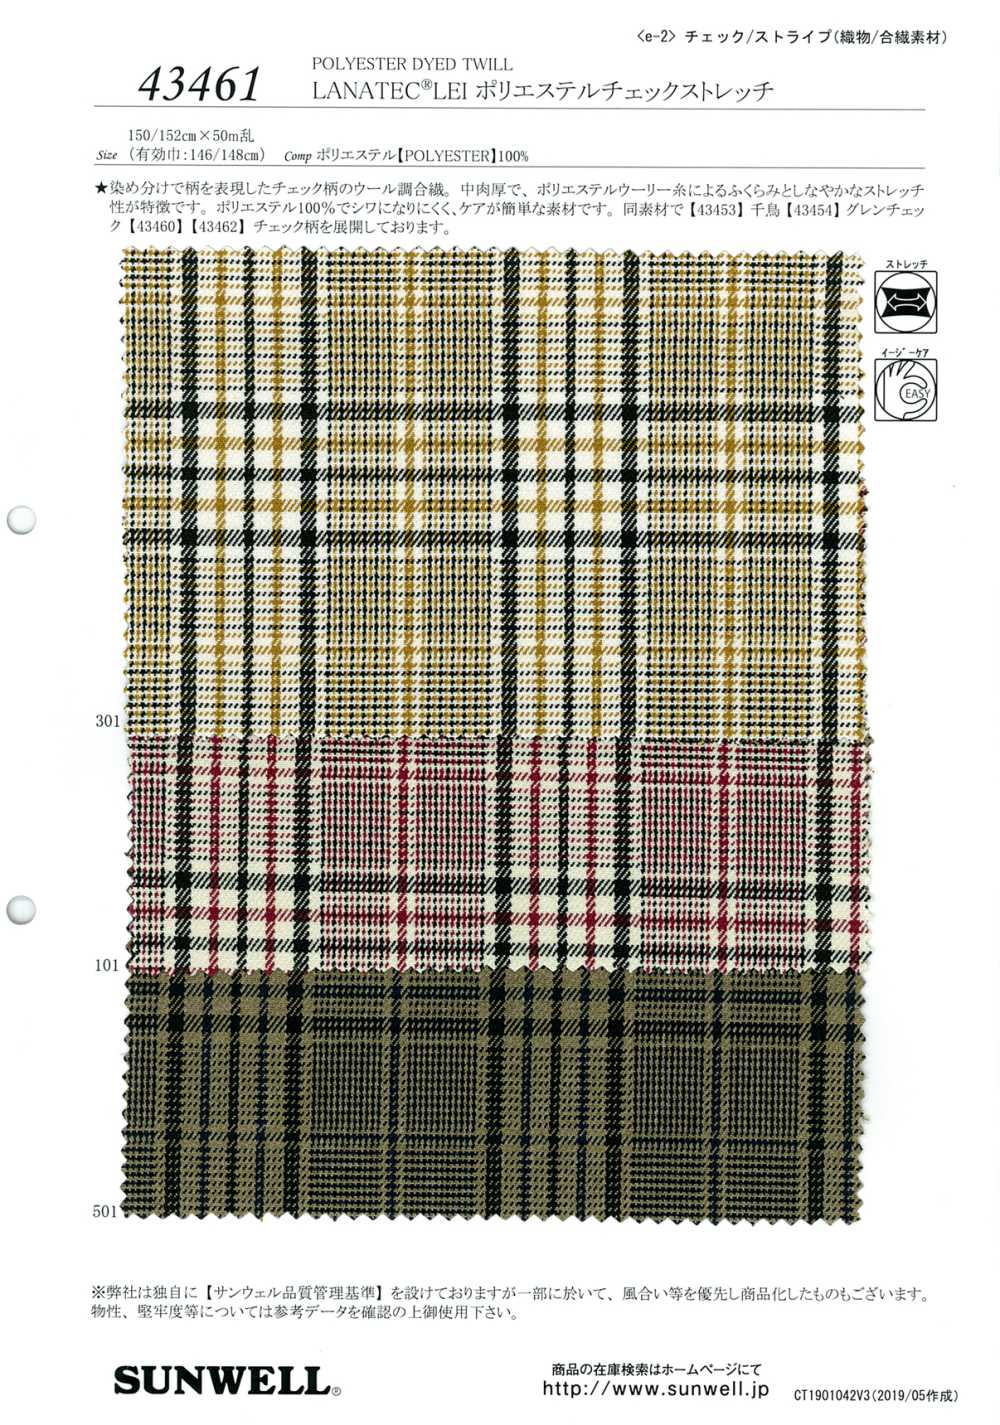 43461 [OUTLET] LANATEC (R) LEI Polyester Check Stretch[Fabrica Textil] SUNWELL